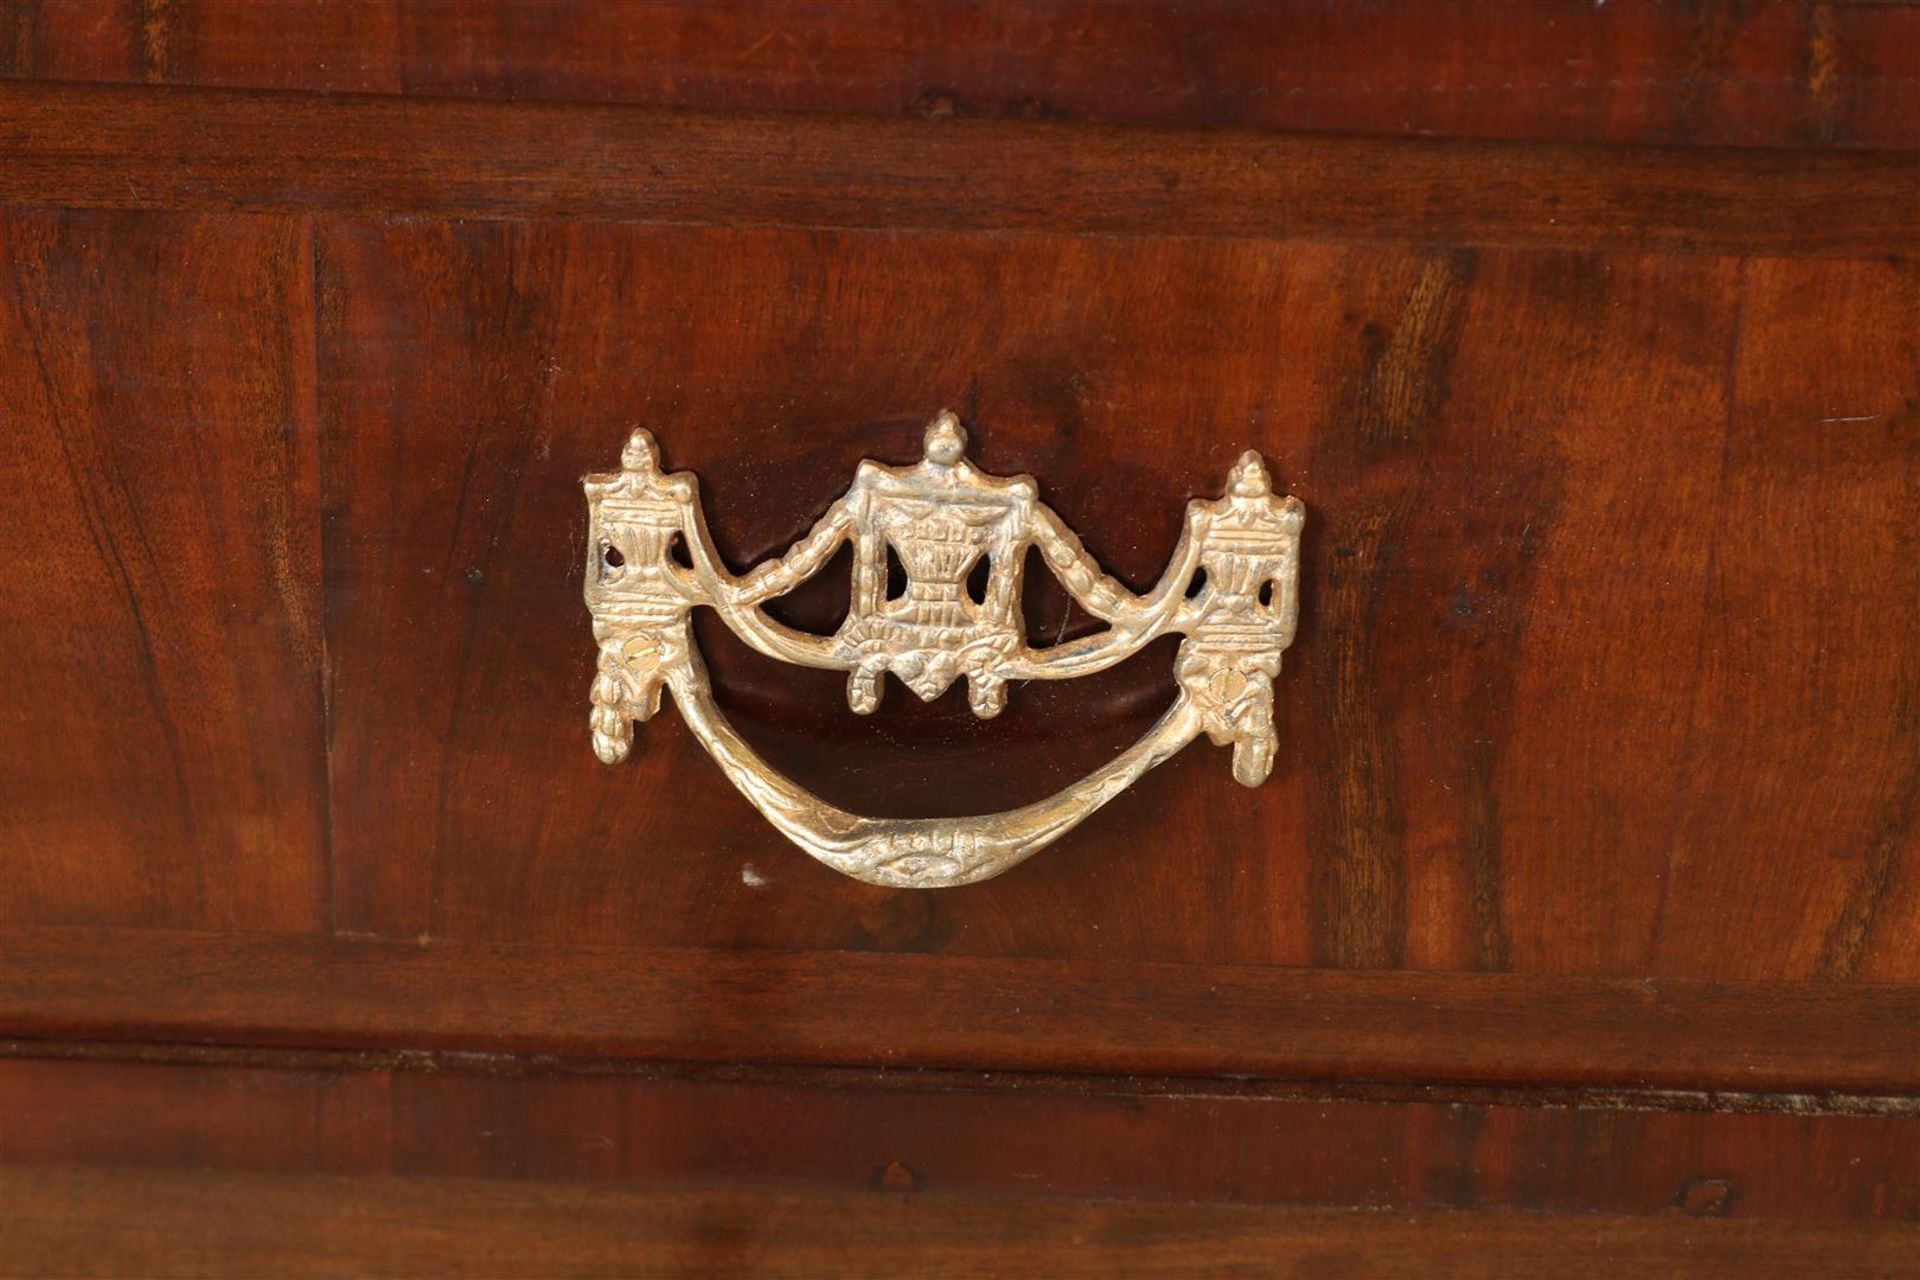 Mahogany Louis XVI cabinet, 2 panel doors with carved garlands and 4 drawers with bronze fittings, - Image 7 of 7